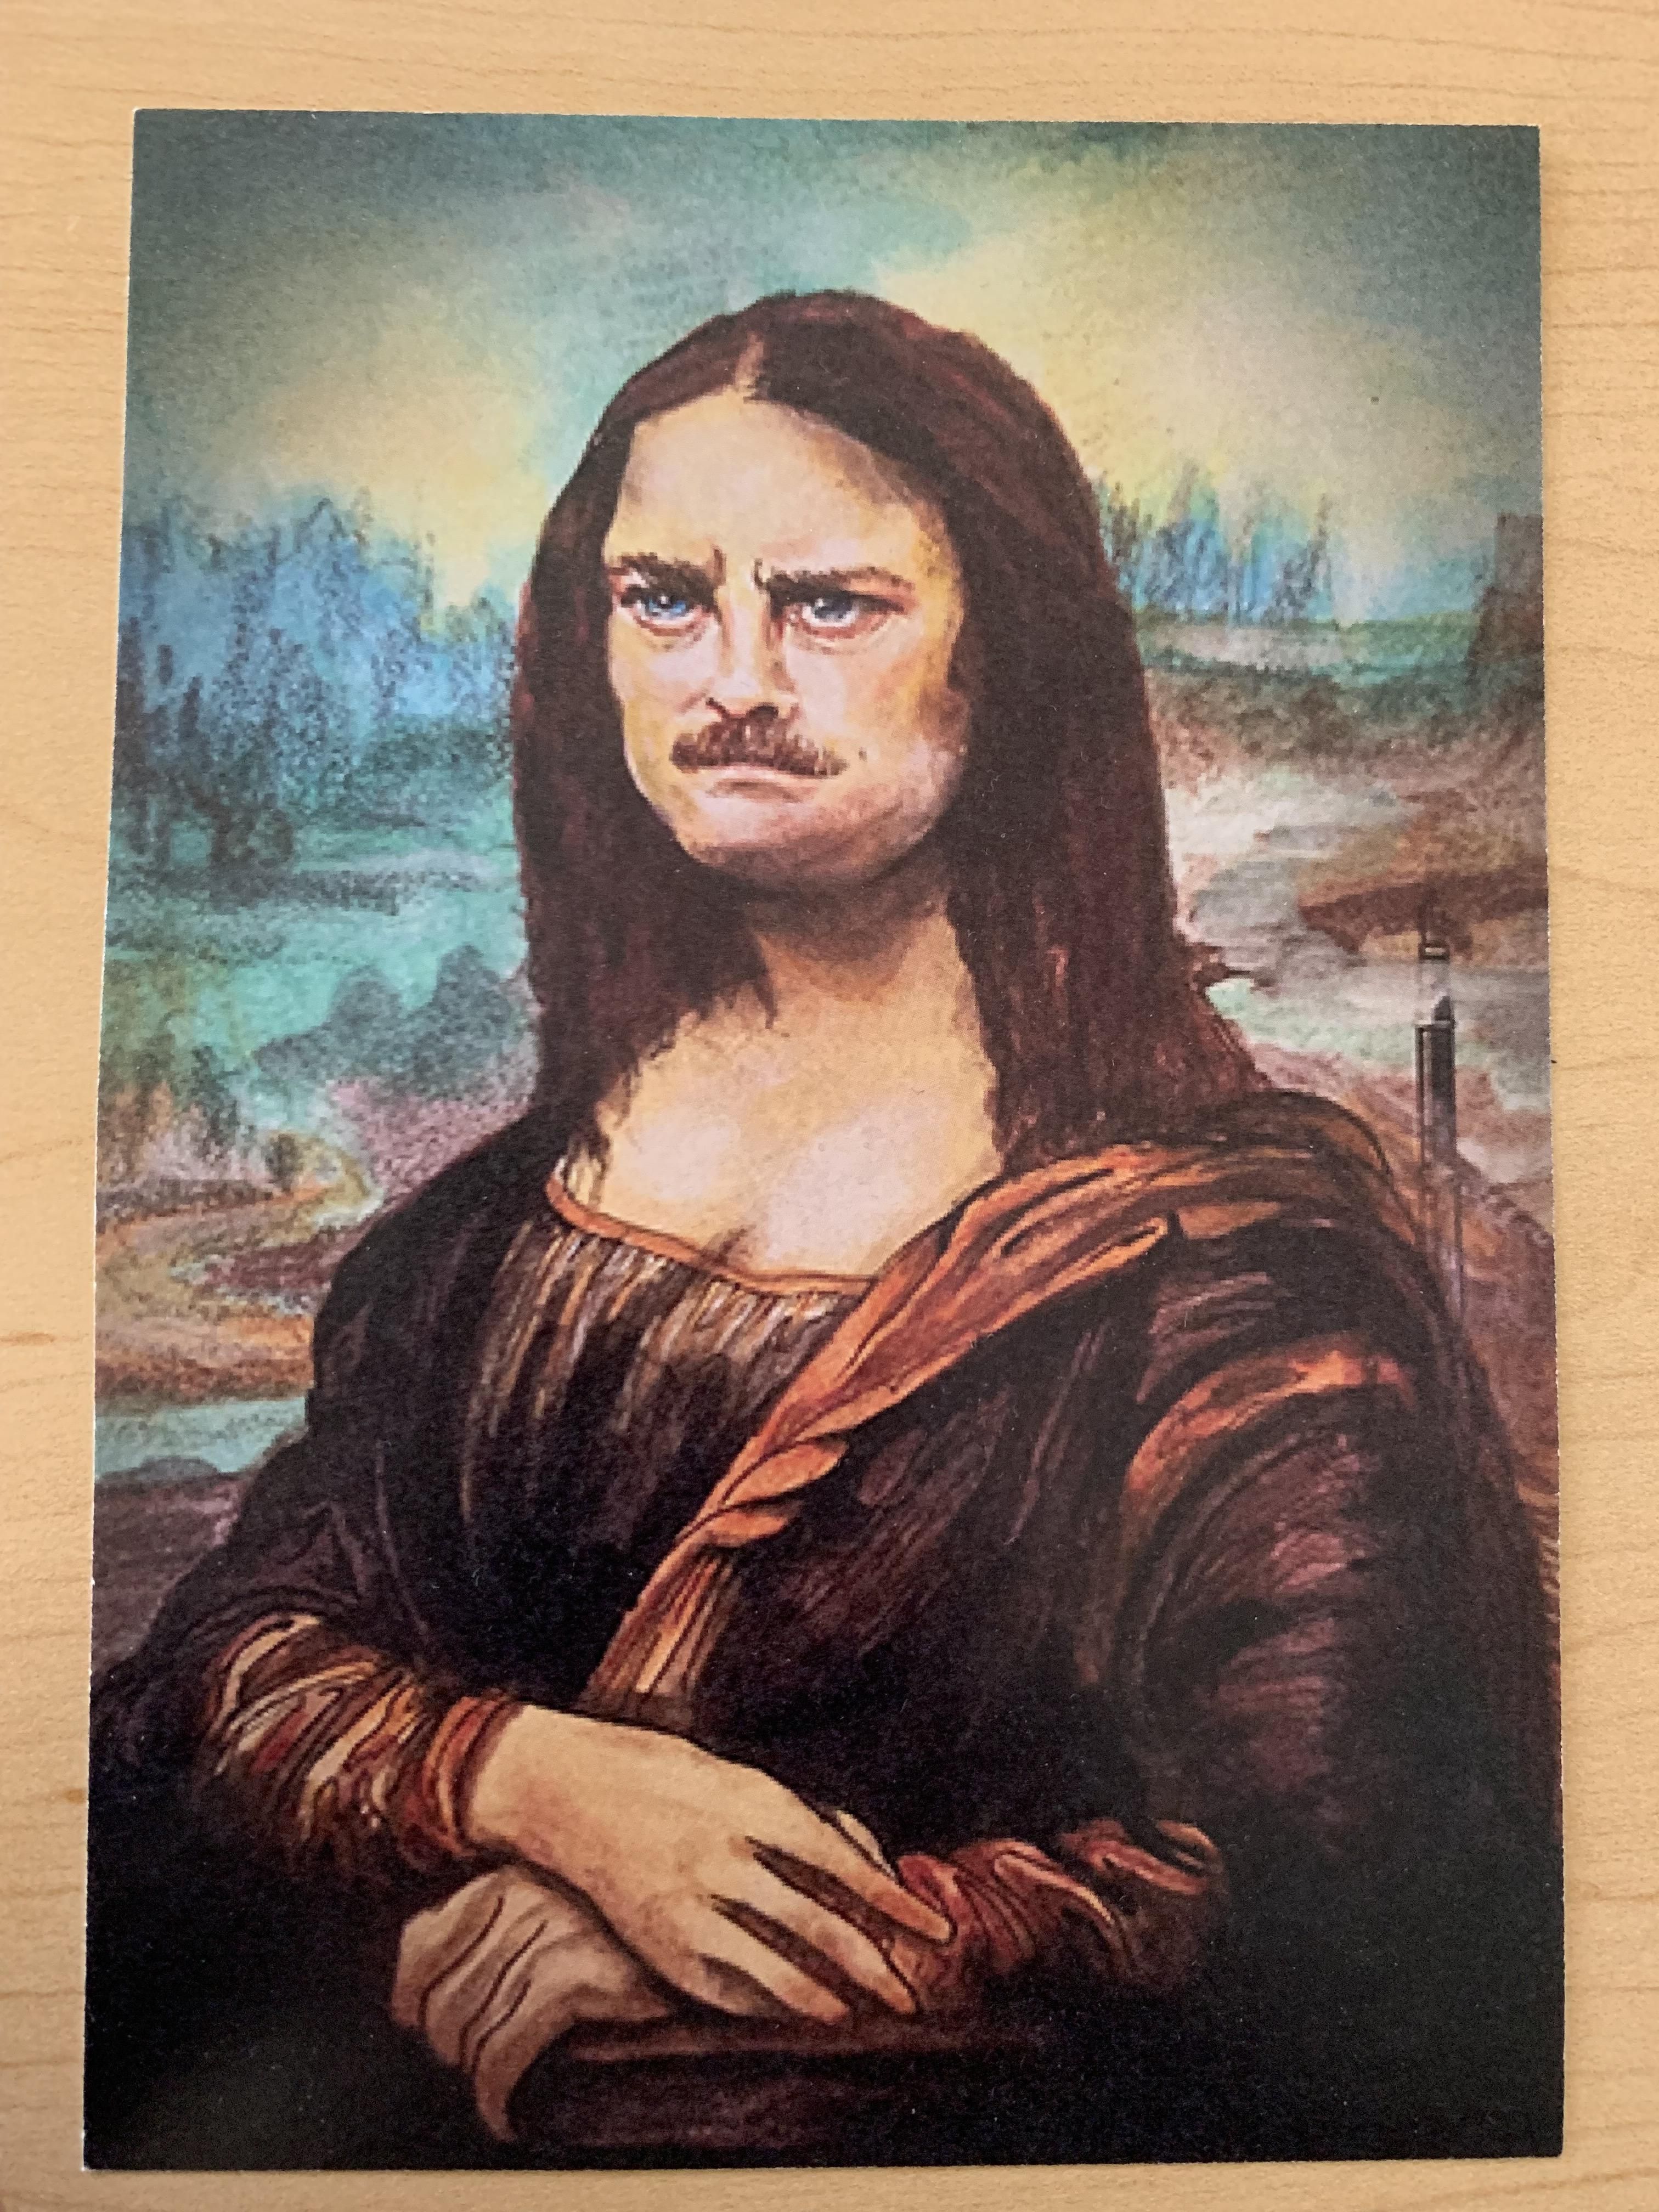 My co-worker painted this for me as a parting gift. I'm forever changed.